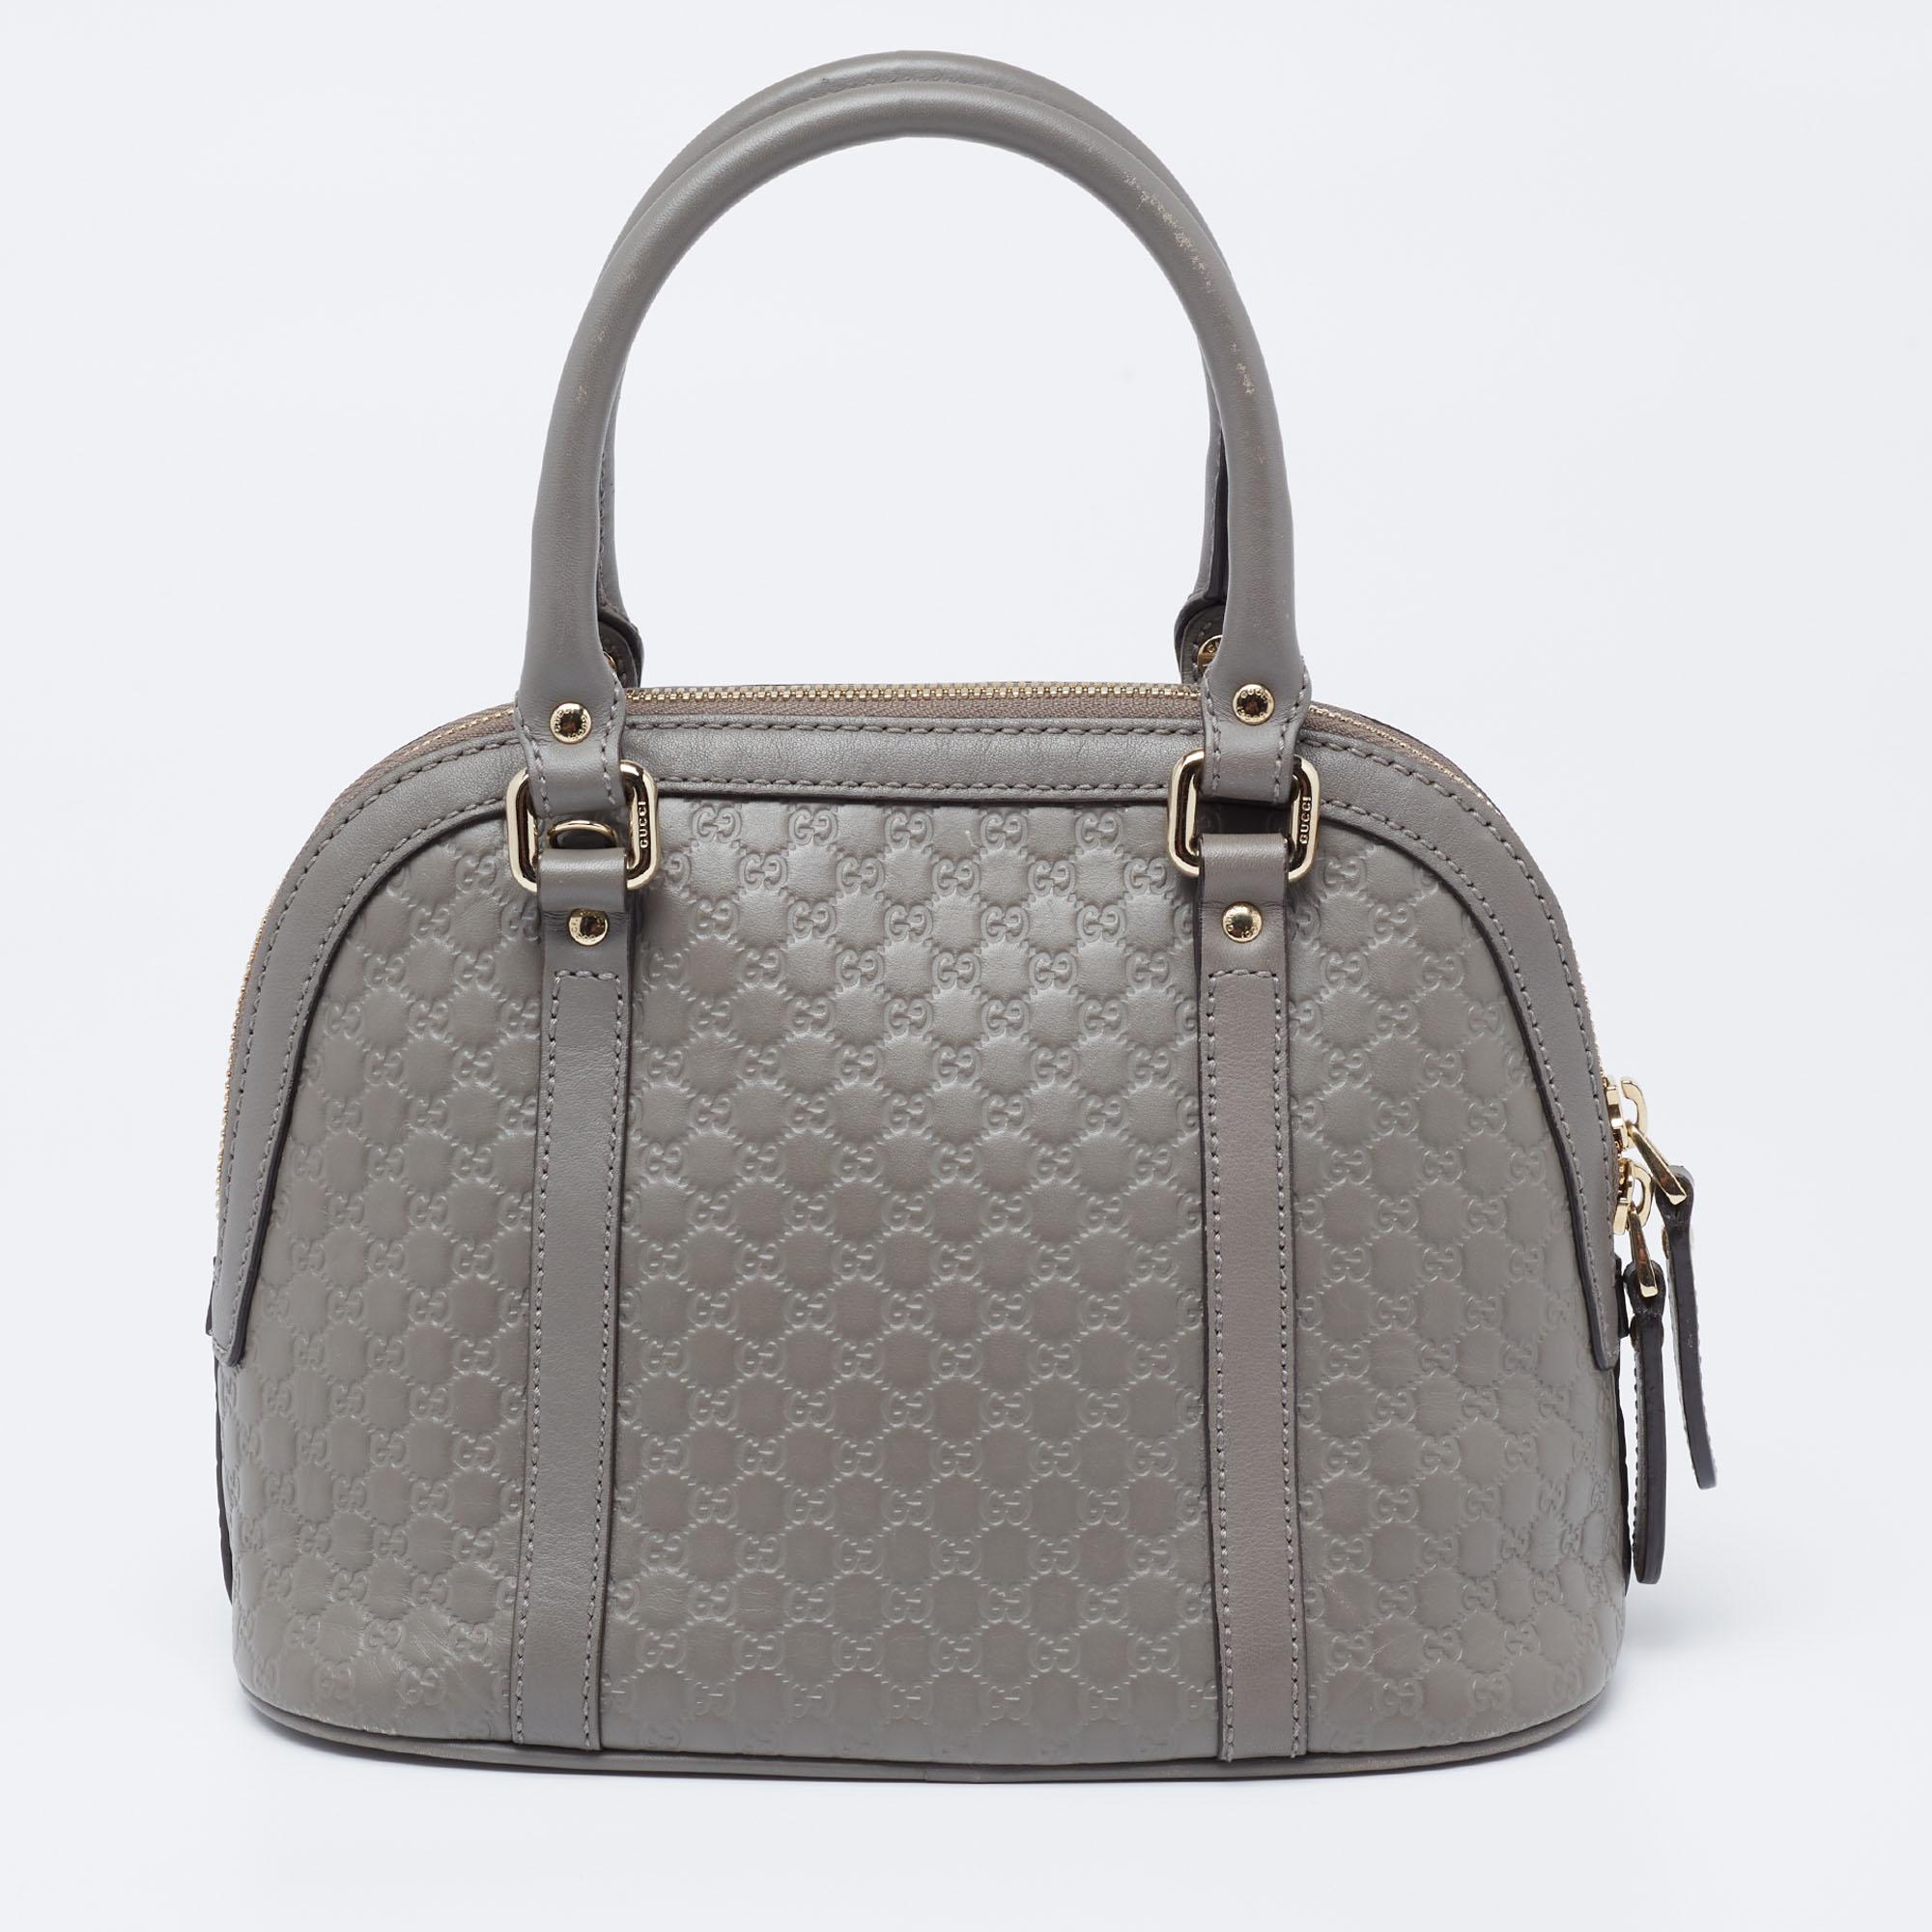 Hold everything you need in style with this mini Dome bag from the house of Gucci. Its grey color exudes a grand appeal, and the Microguccissima leather projects the iconic Gucci charm. The versatility lies in the dual-rolled handles and long